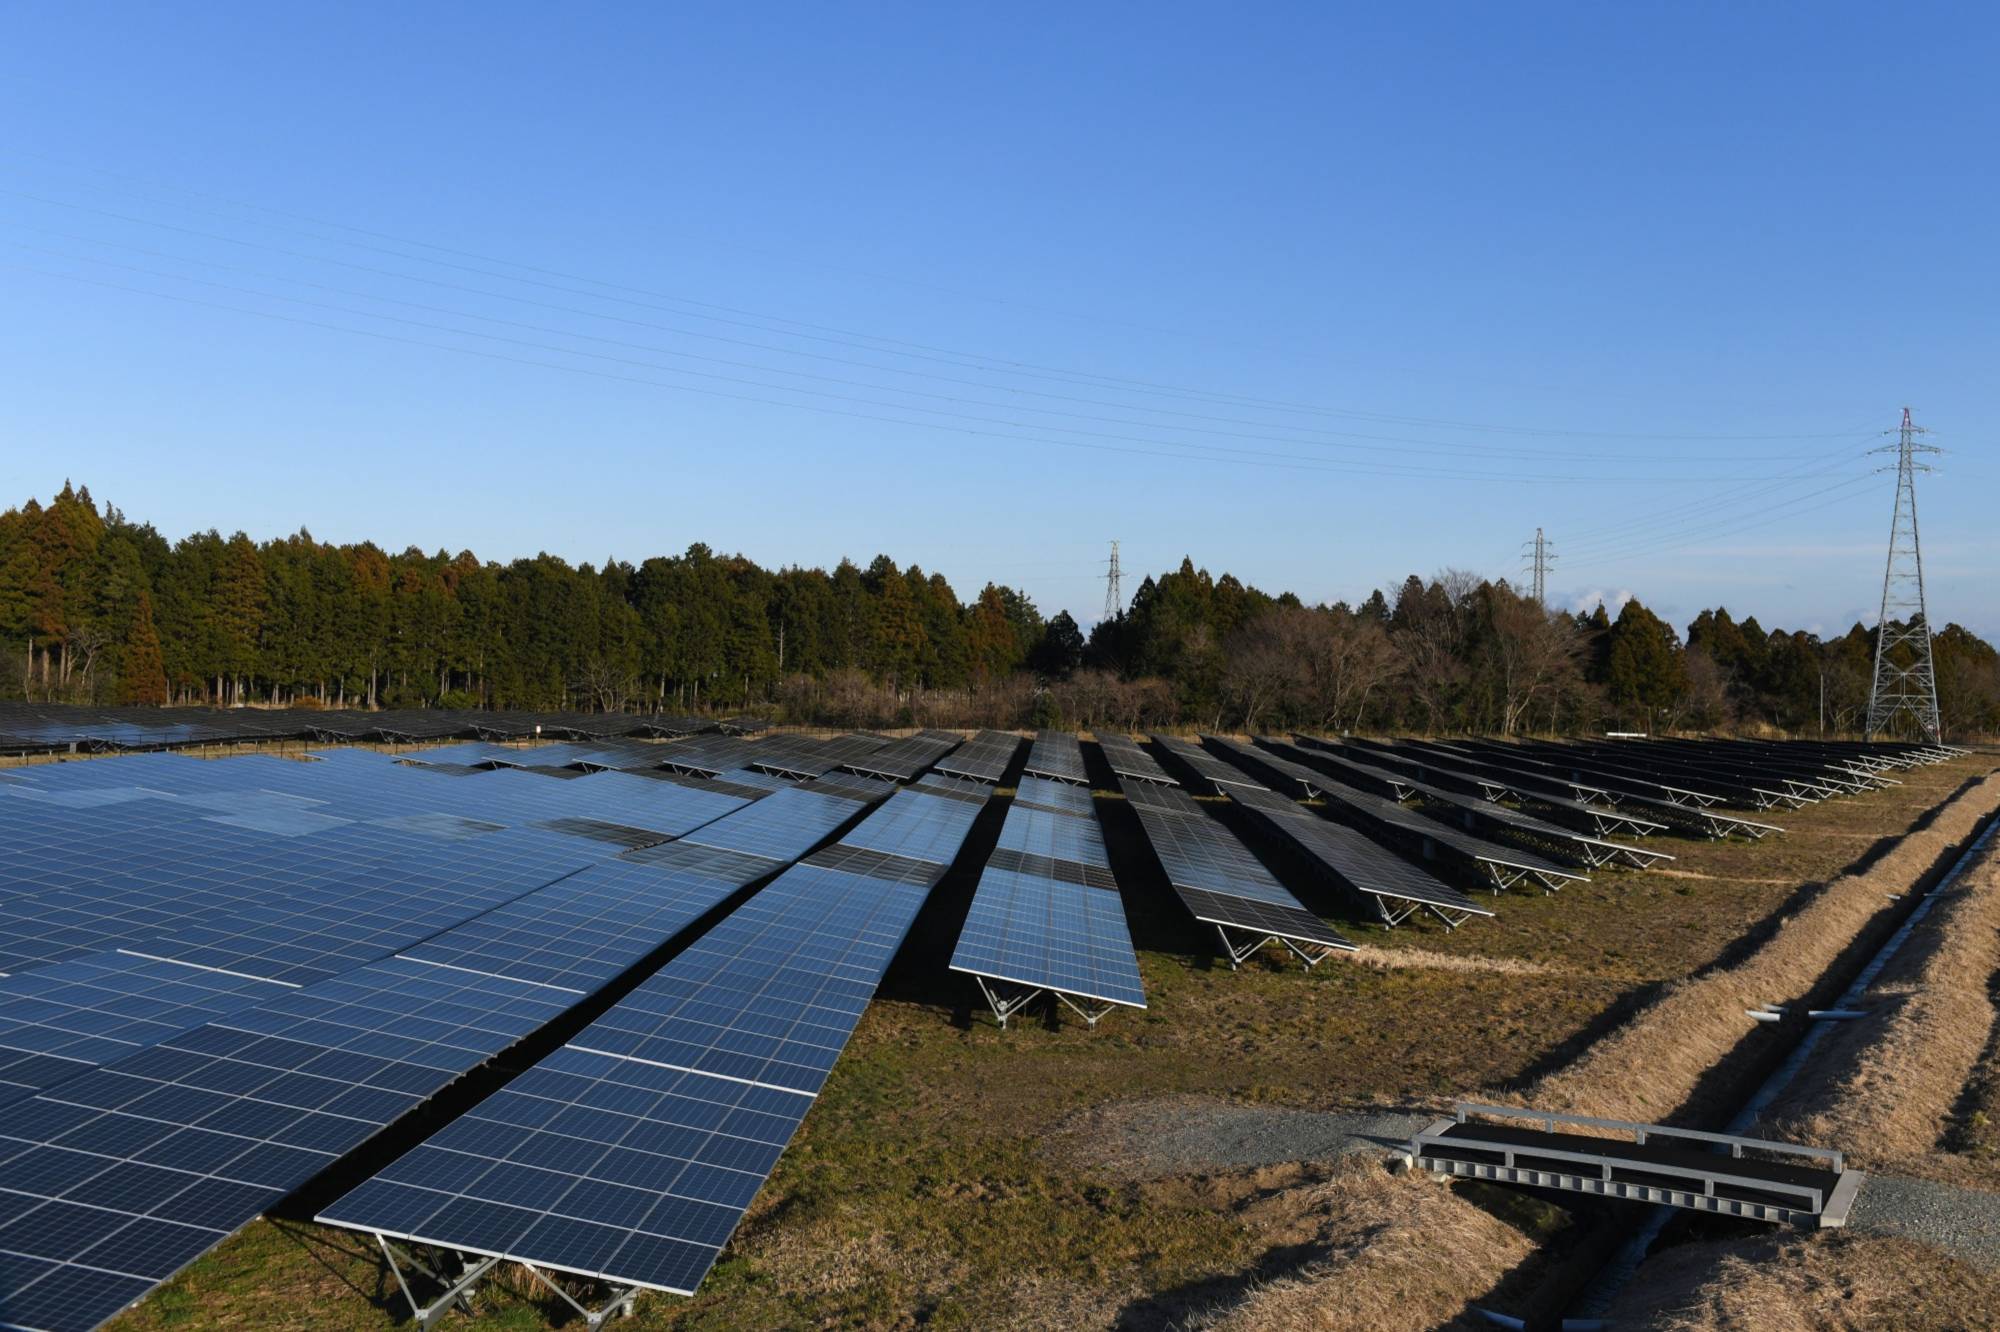 Solar panels installed by Fukushima Electric Power Co. stand in Tomioka, Fukushima Prefecture, last February. | BLOOMBERG